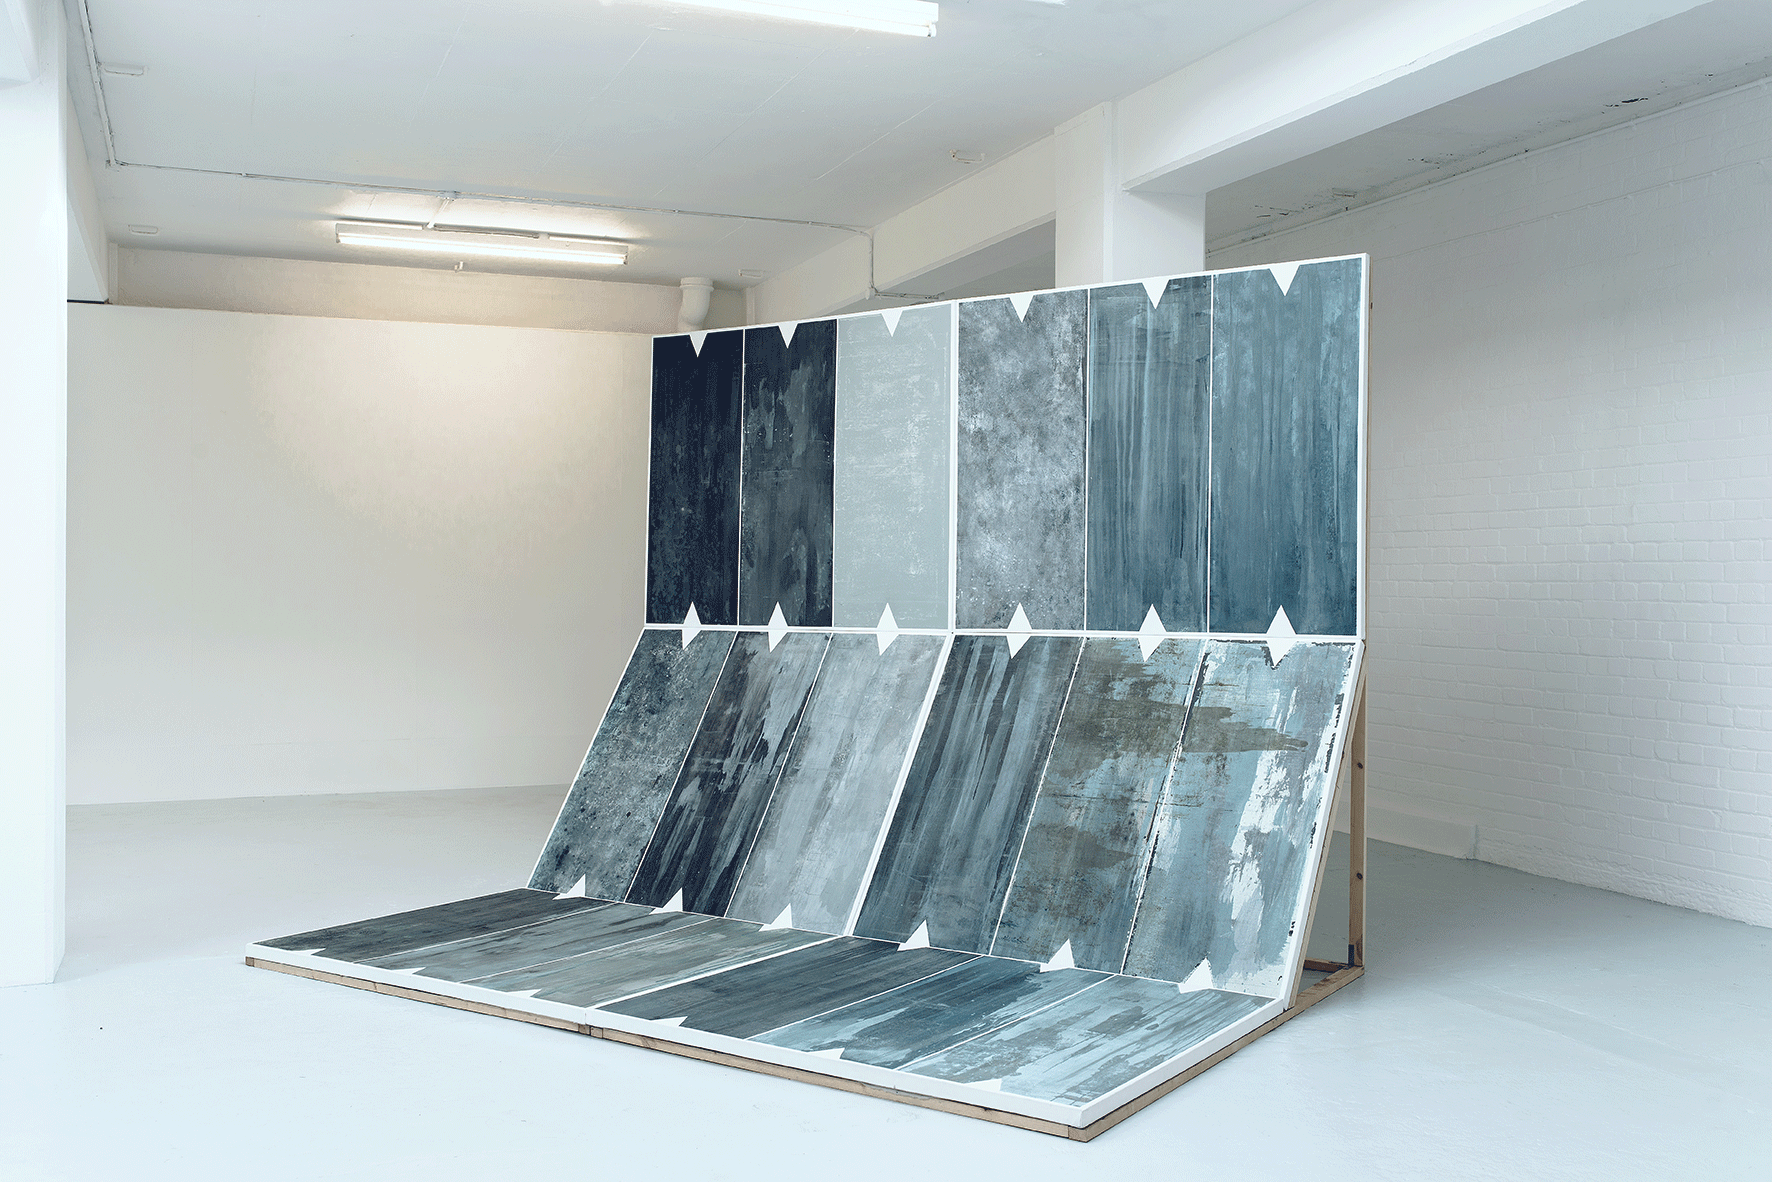  Thunder 2016  Oil on canvas, wooden supports  6x (150x120cm canvases) 